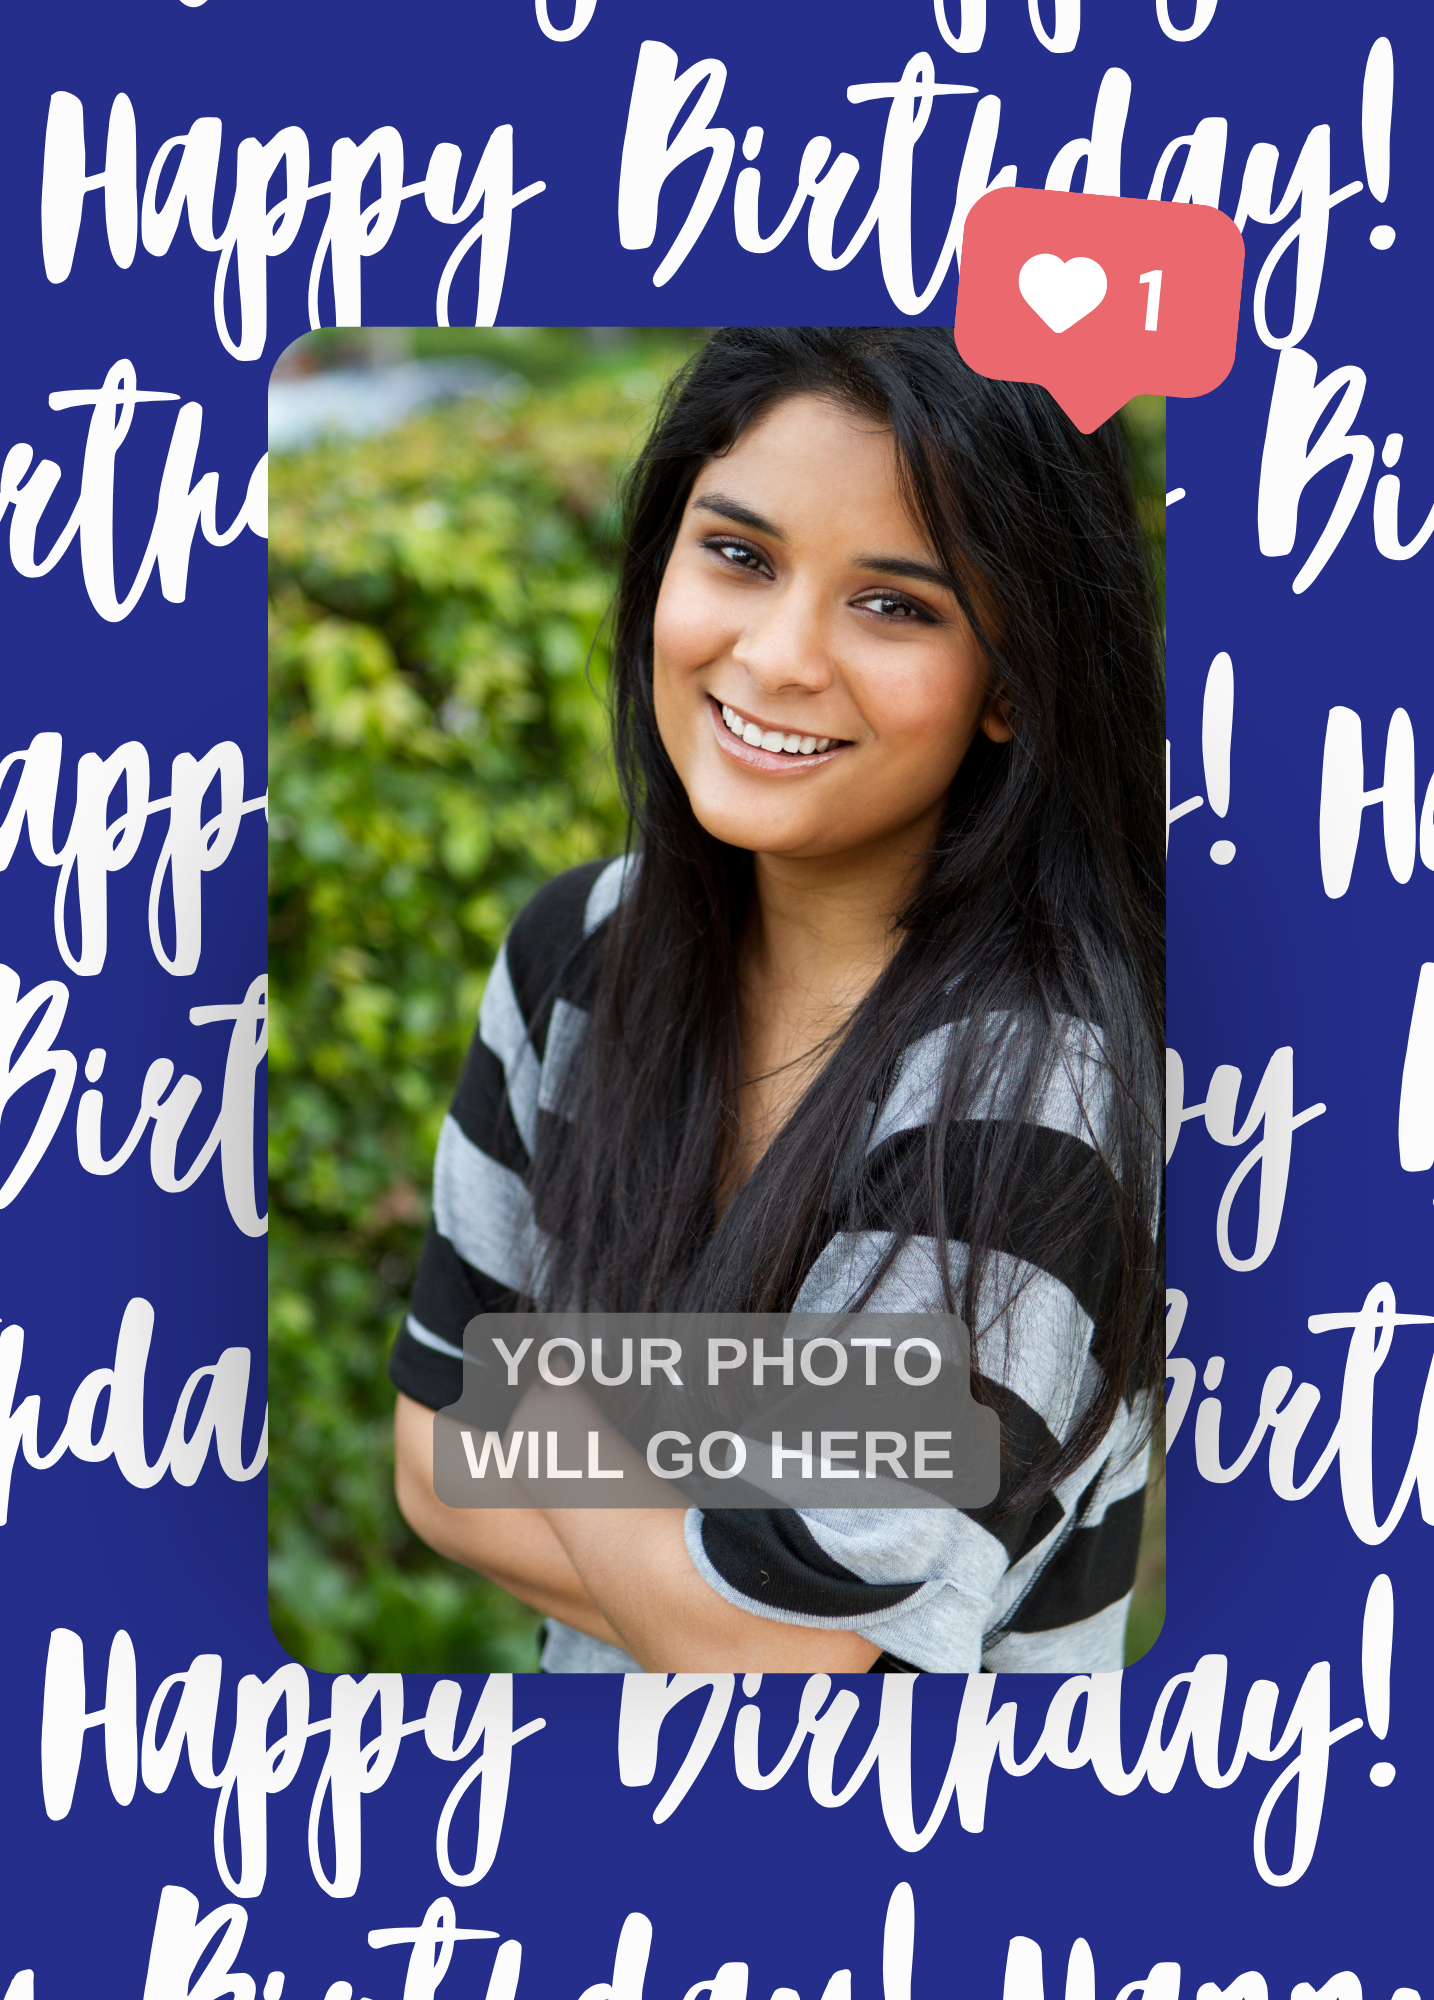 Happy Birthday Photo Card (Heart Emoji)- Personalized Greeting Card for Someone in Jail or Prison